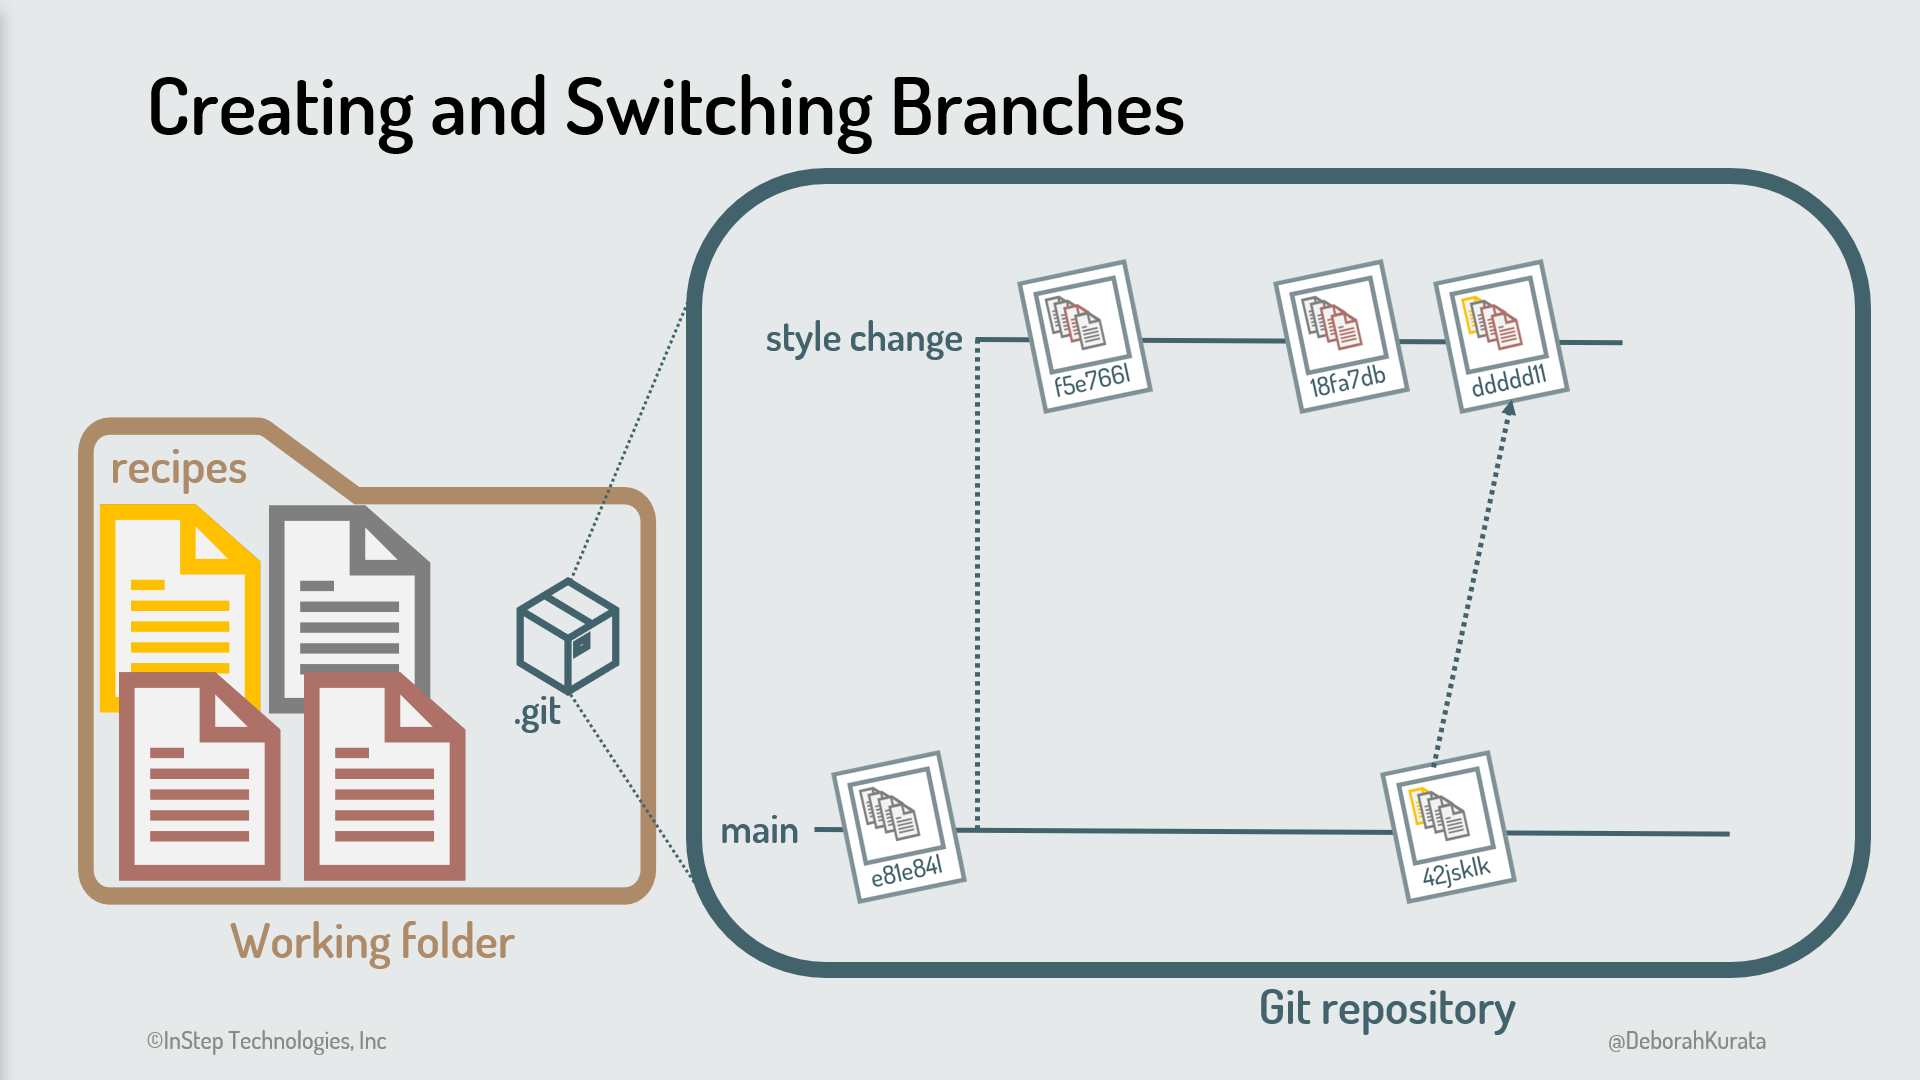 Working folder on the left. Git repository showing merge from main to the "style change" branch